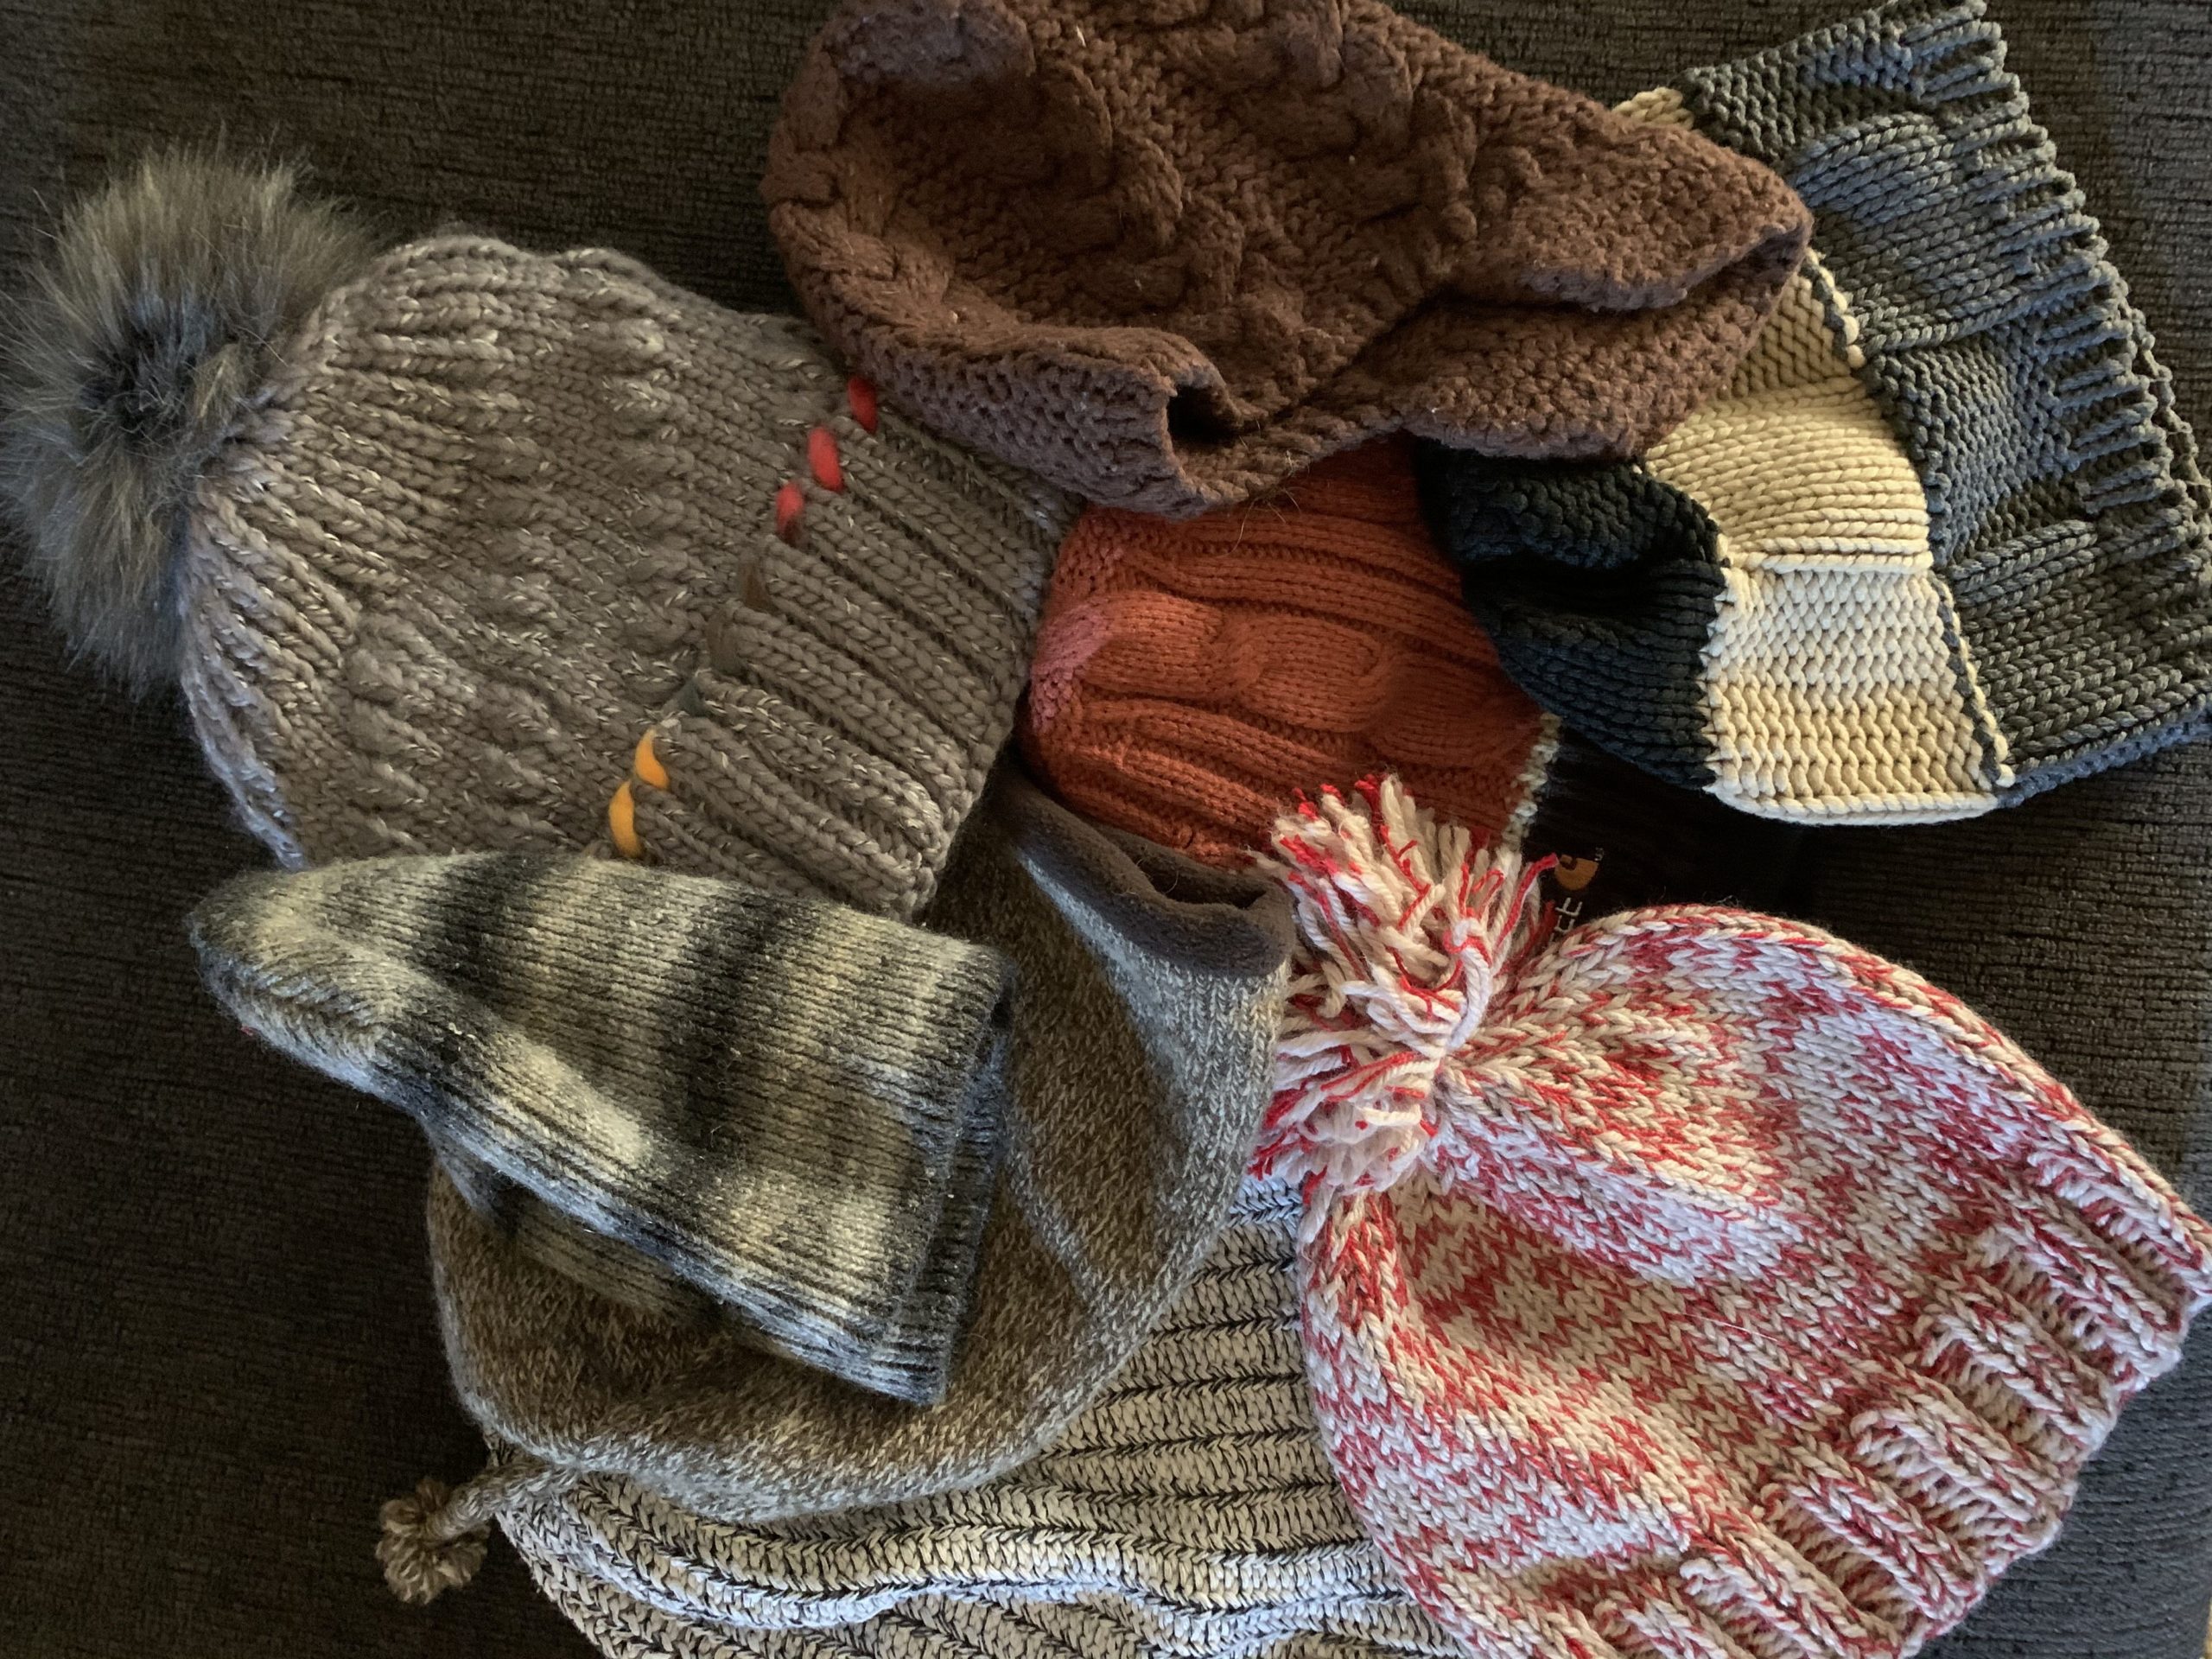 A pile of knitted hats